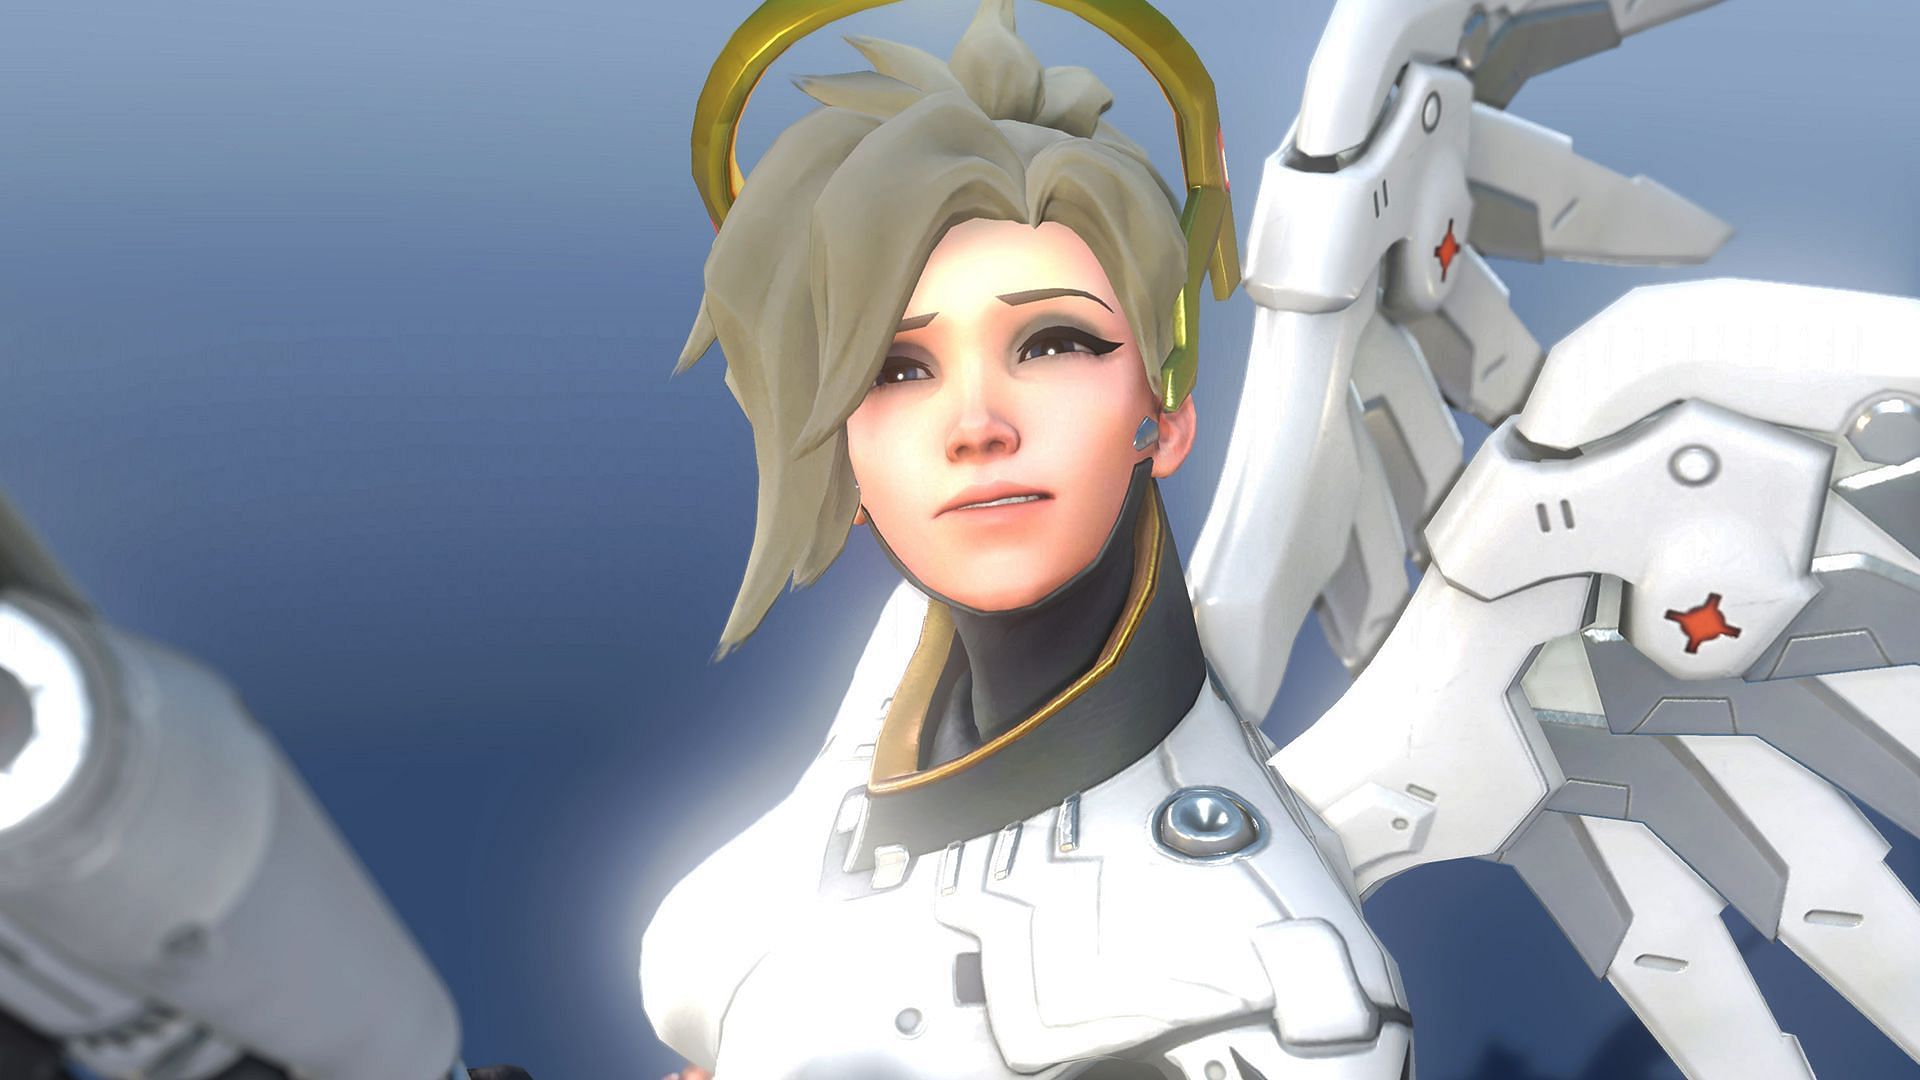 A look at Mercy in Overwatch 2 (Image via Blizzard Entertainment)